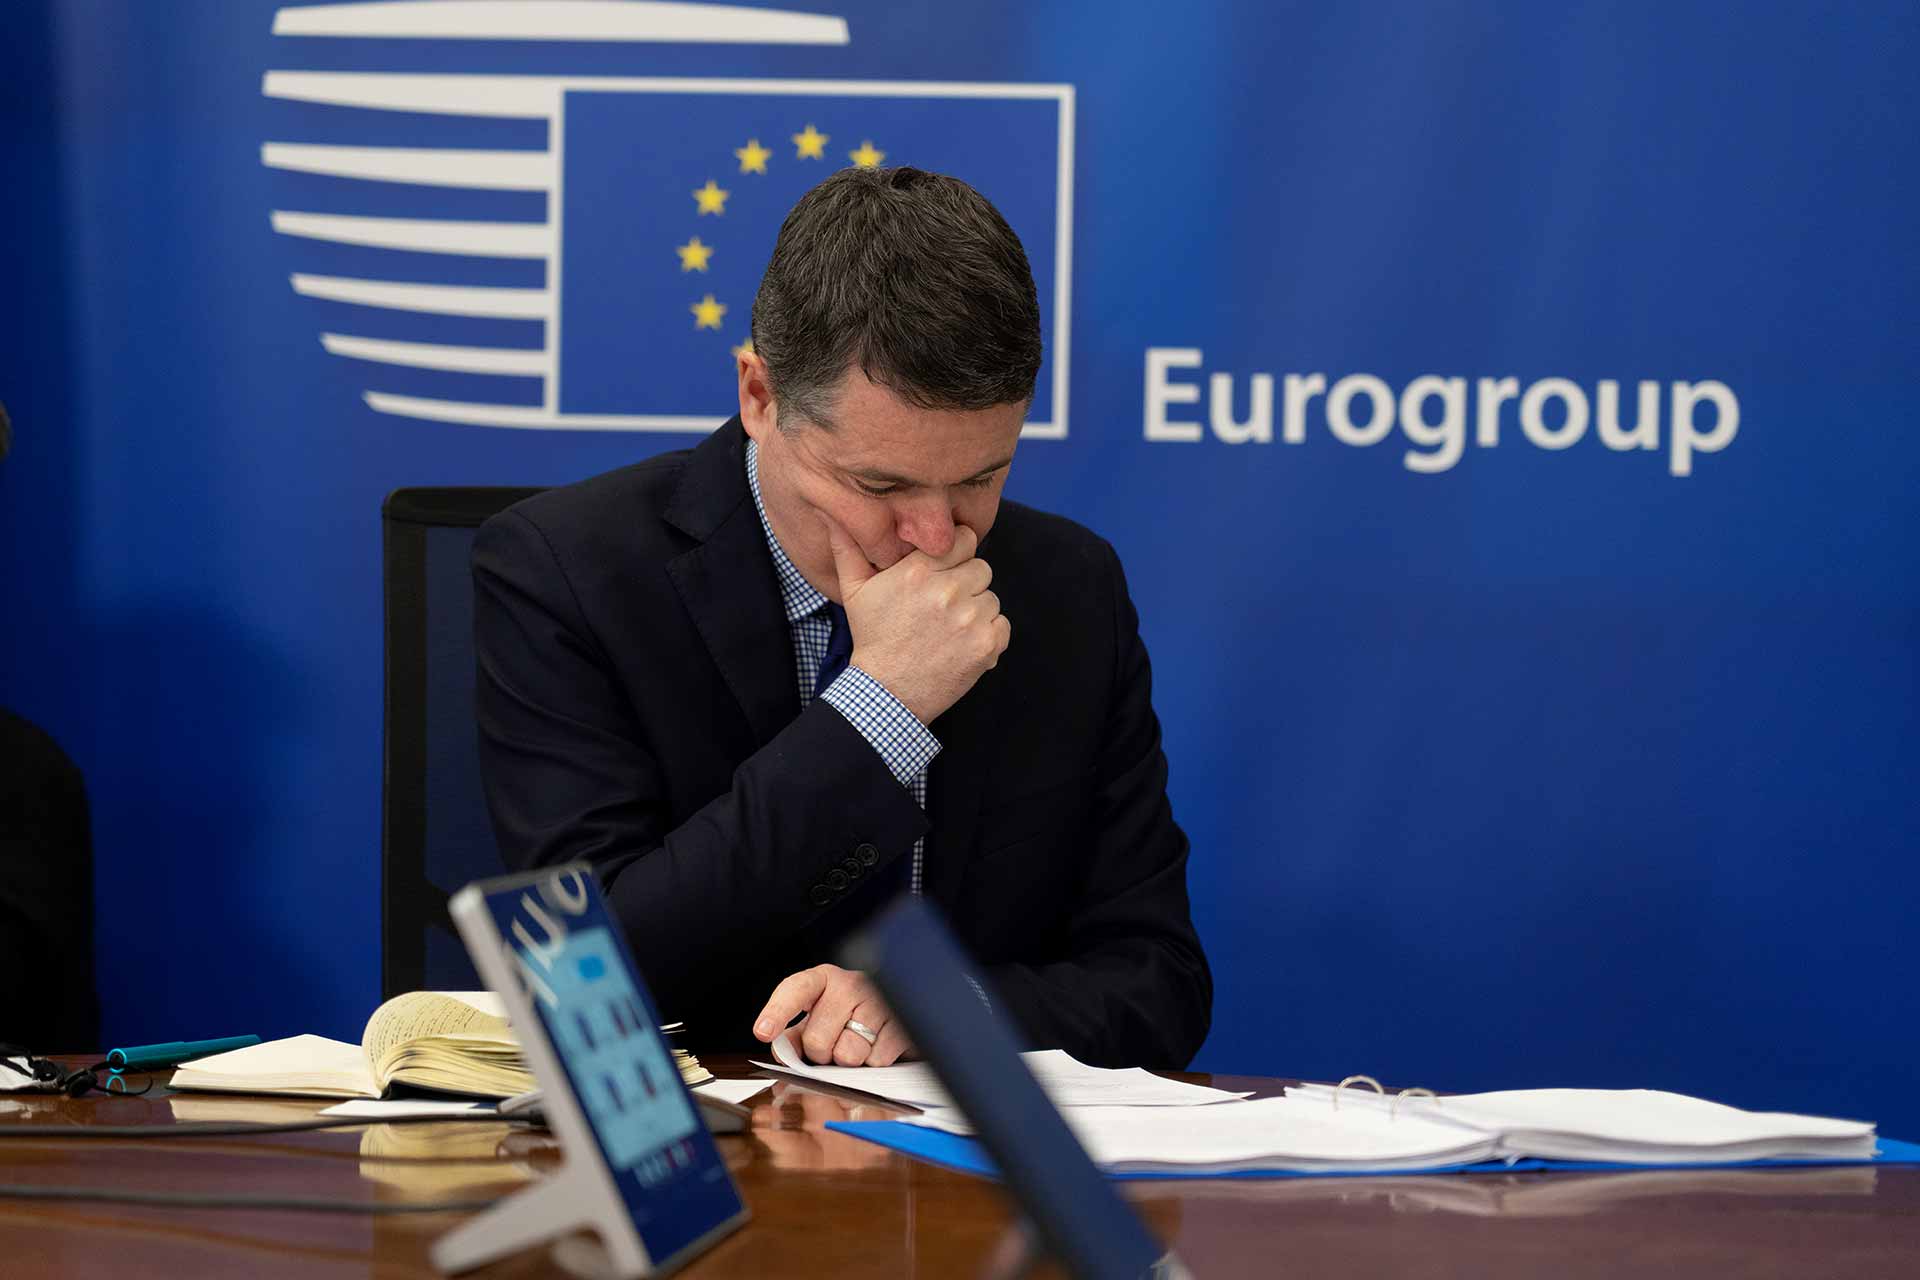 Paschal Donohoe Eurogroup President and Finance Minister of Ireland